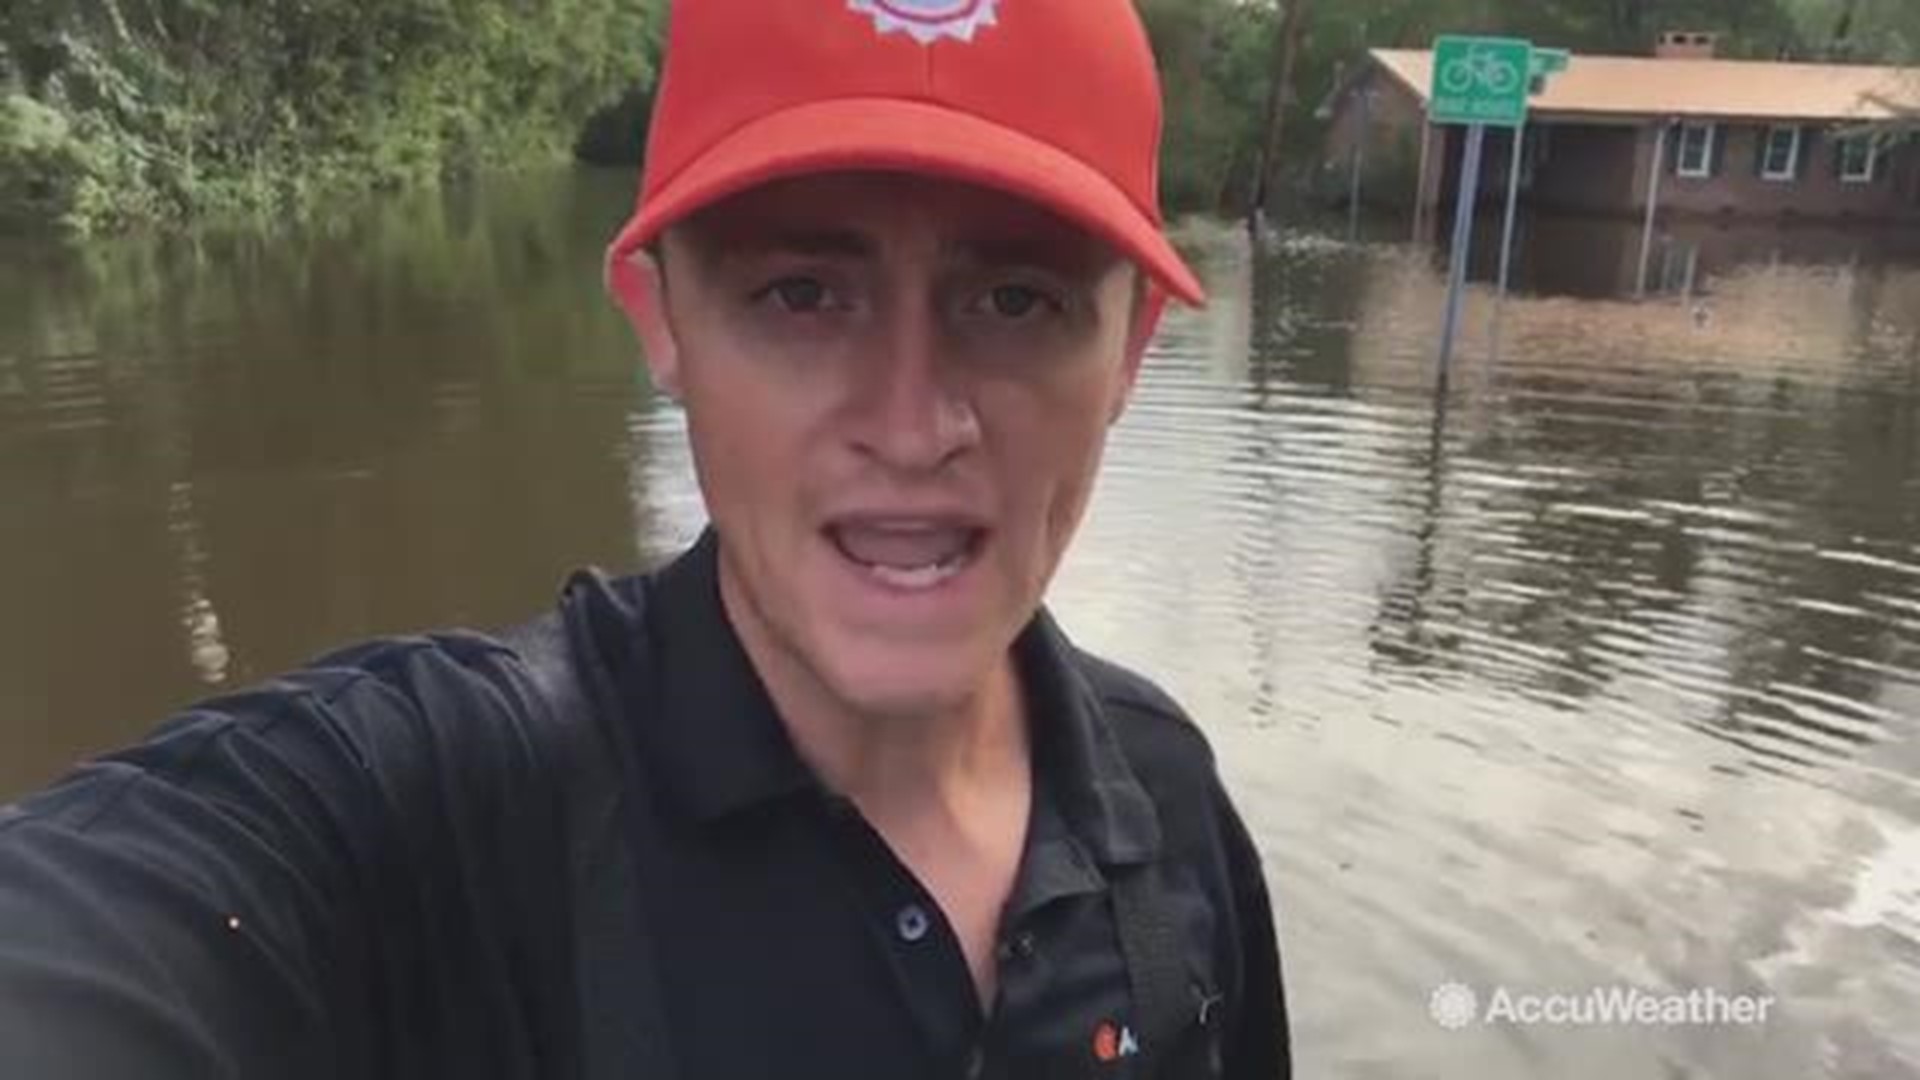 Jonathan Petramala reports from the Waccamaw River in Conway, South Carolina. Officials are nervously watching the river as it continues to rise. The river is already at major flood status and is expected to crest its banks within a few days.